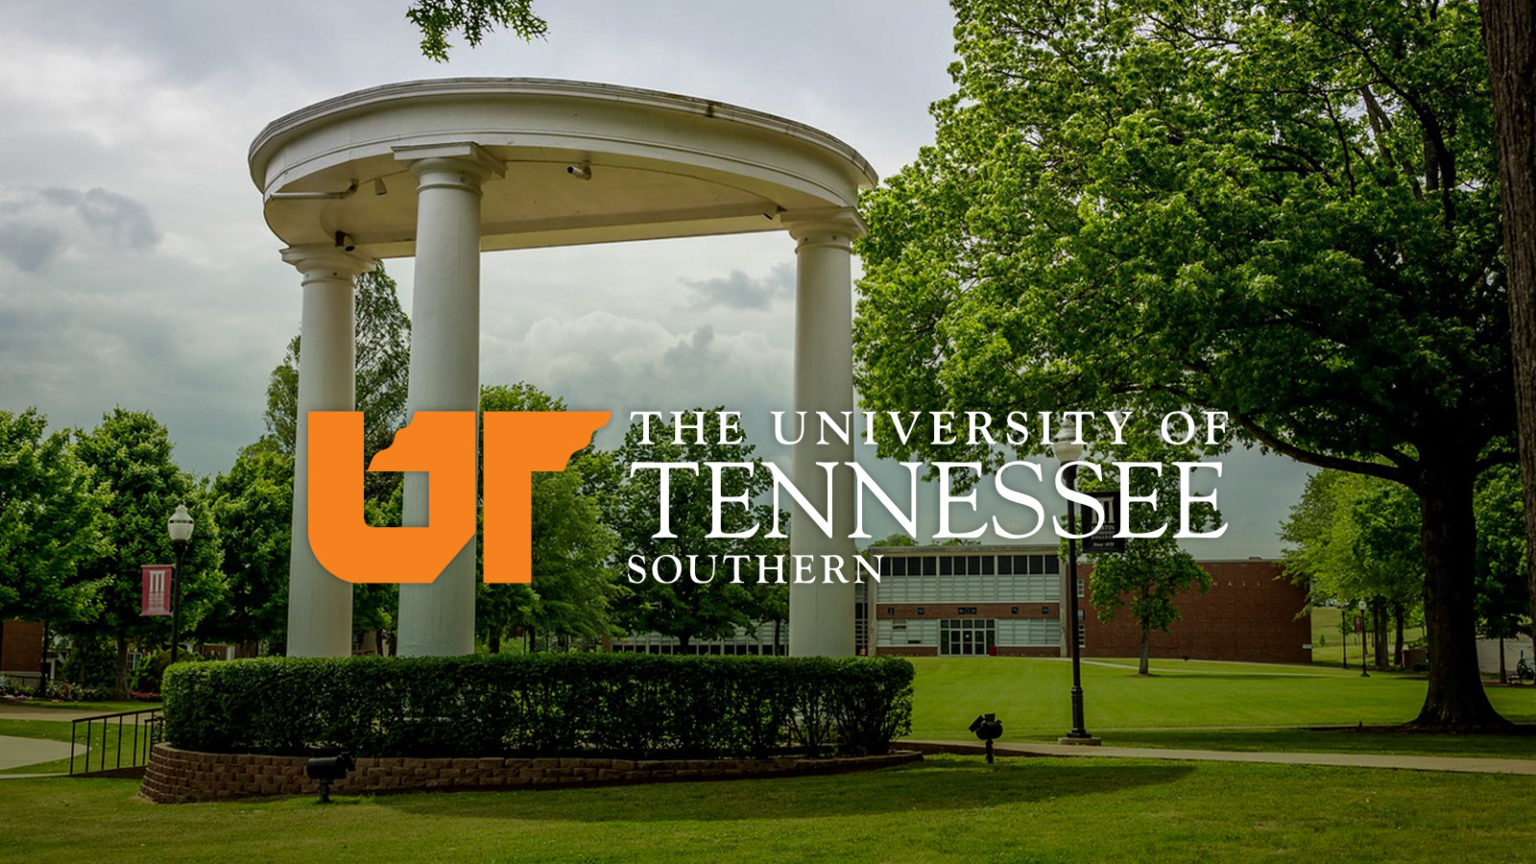 Admissions - The University of Tennessee Southern